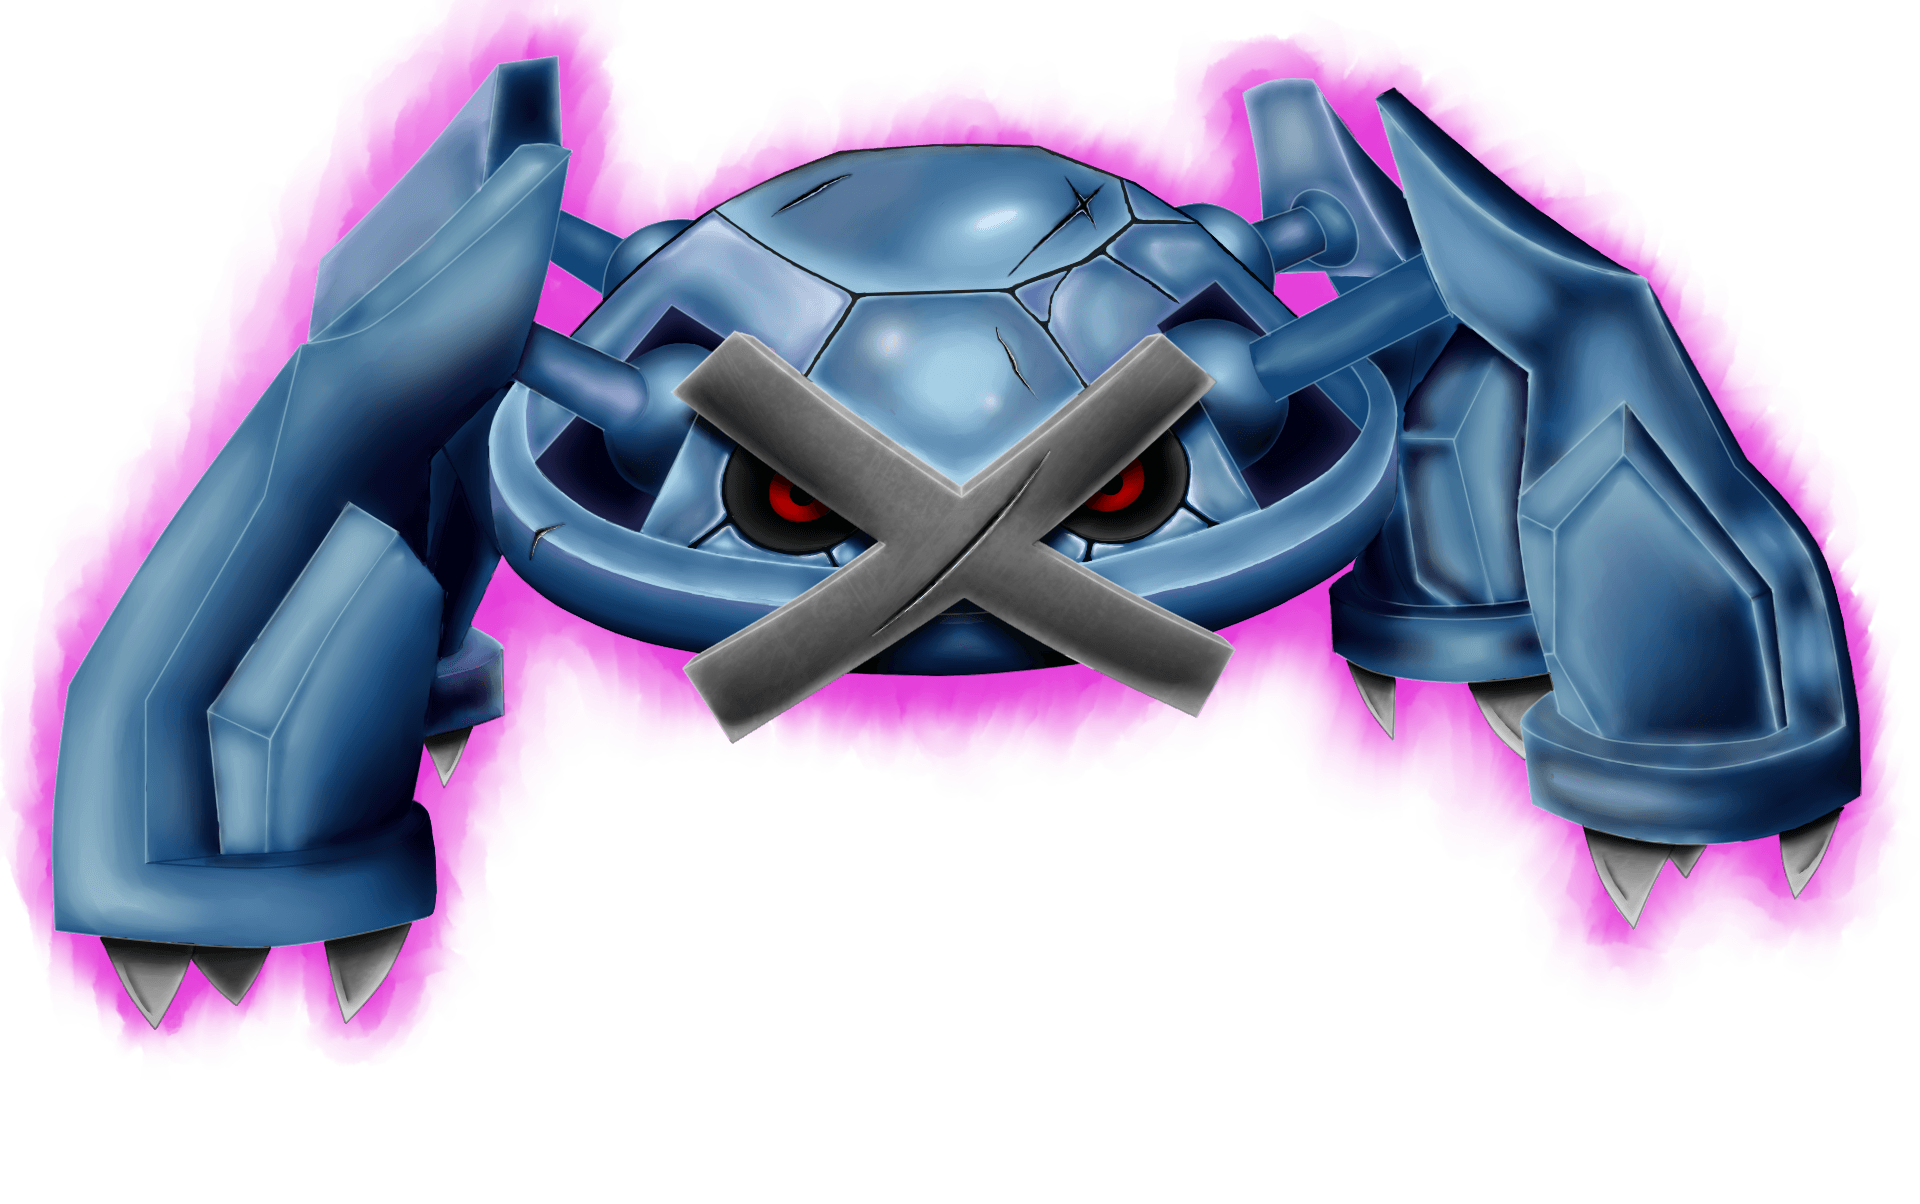 Metagross Wallpapers Image Photos Pictures Backgrounds.